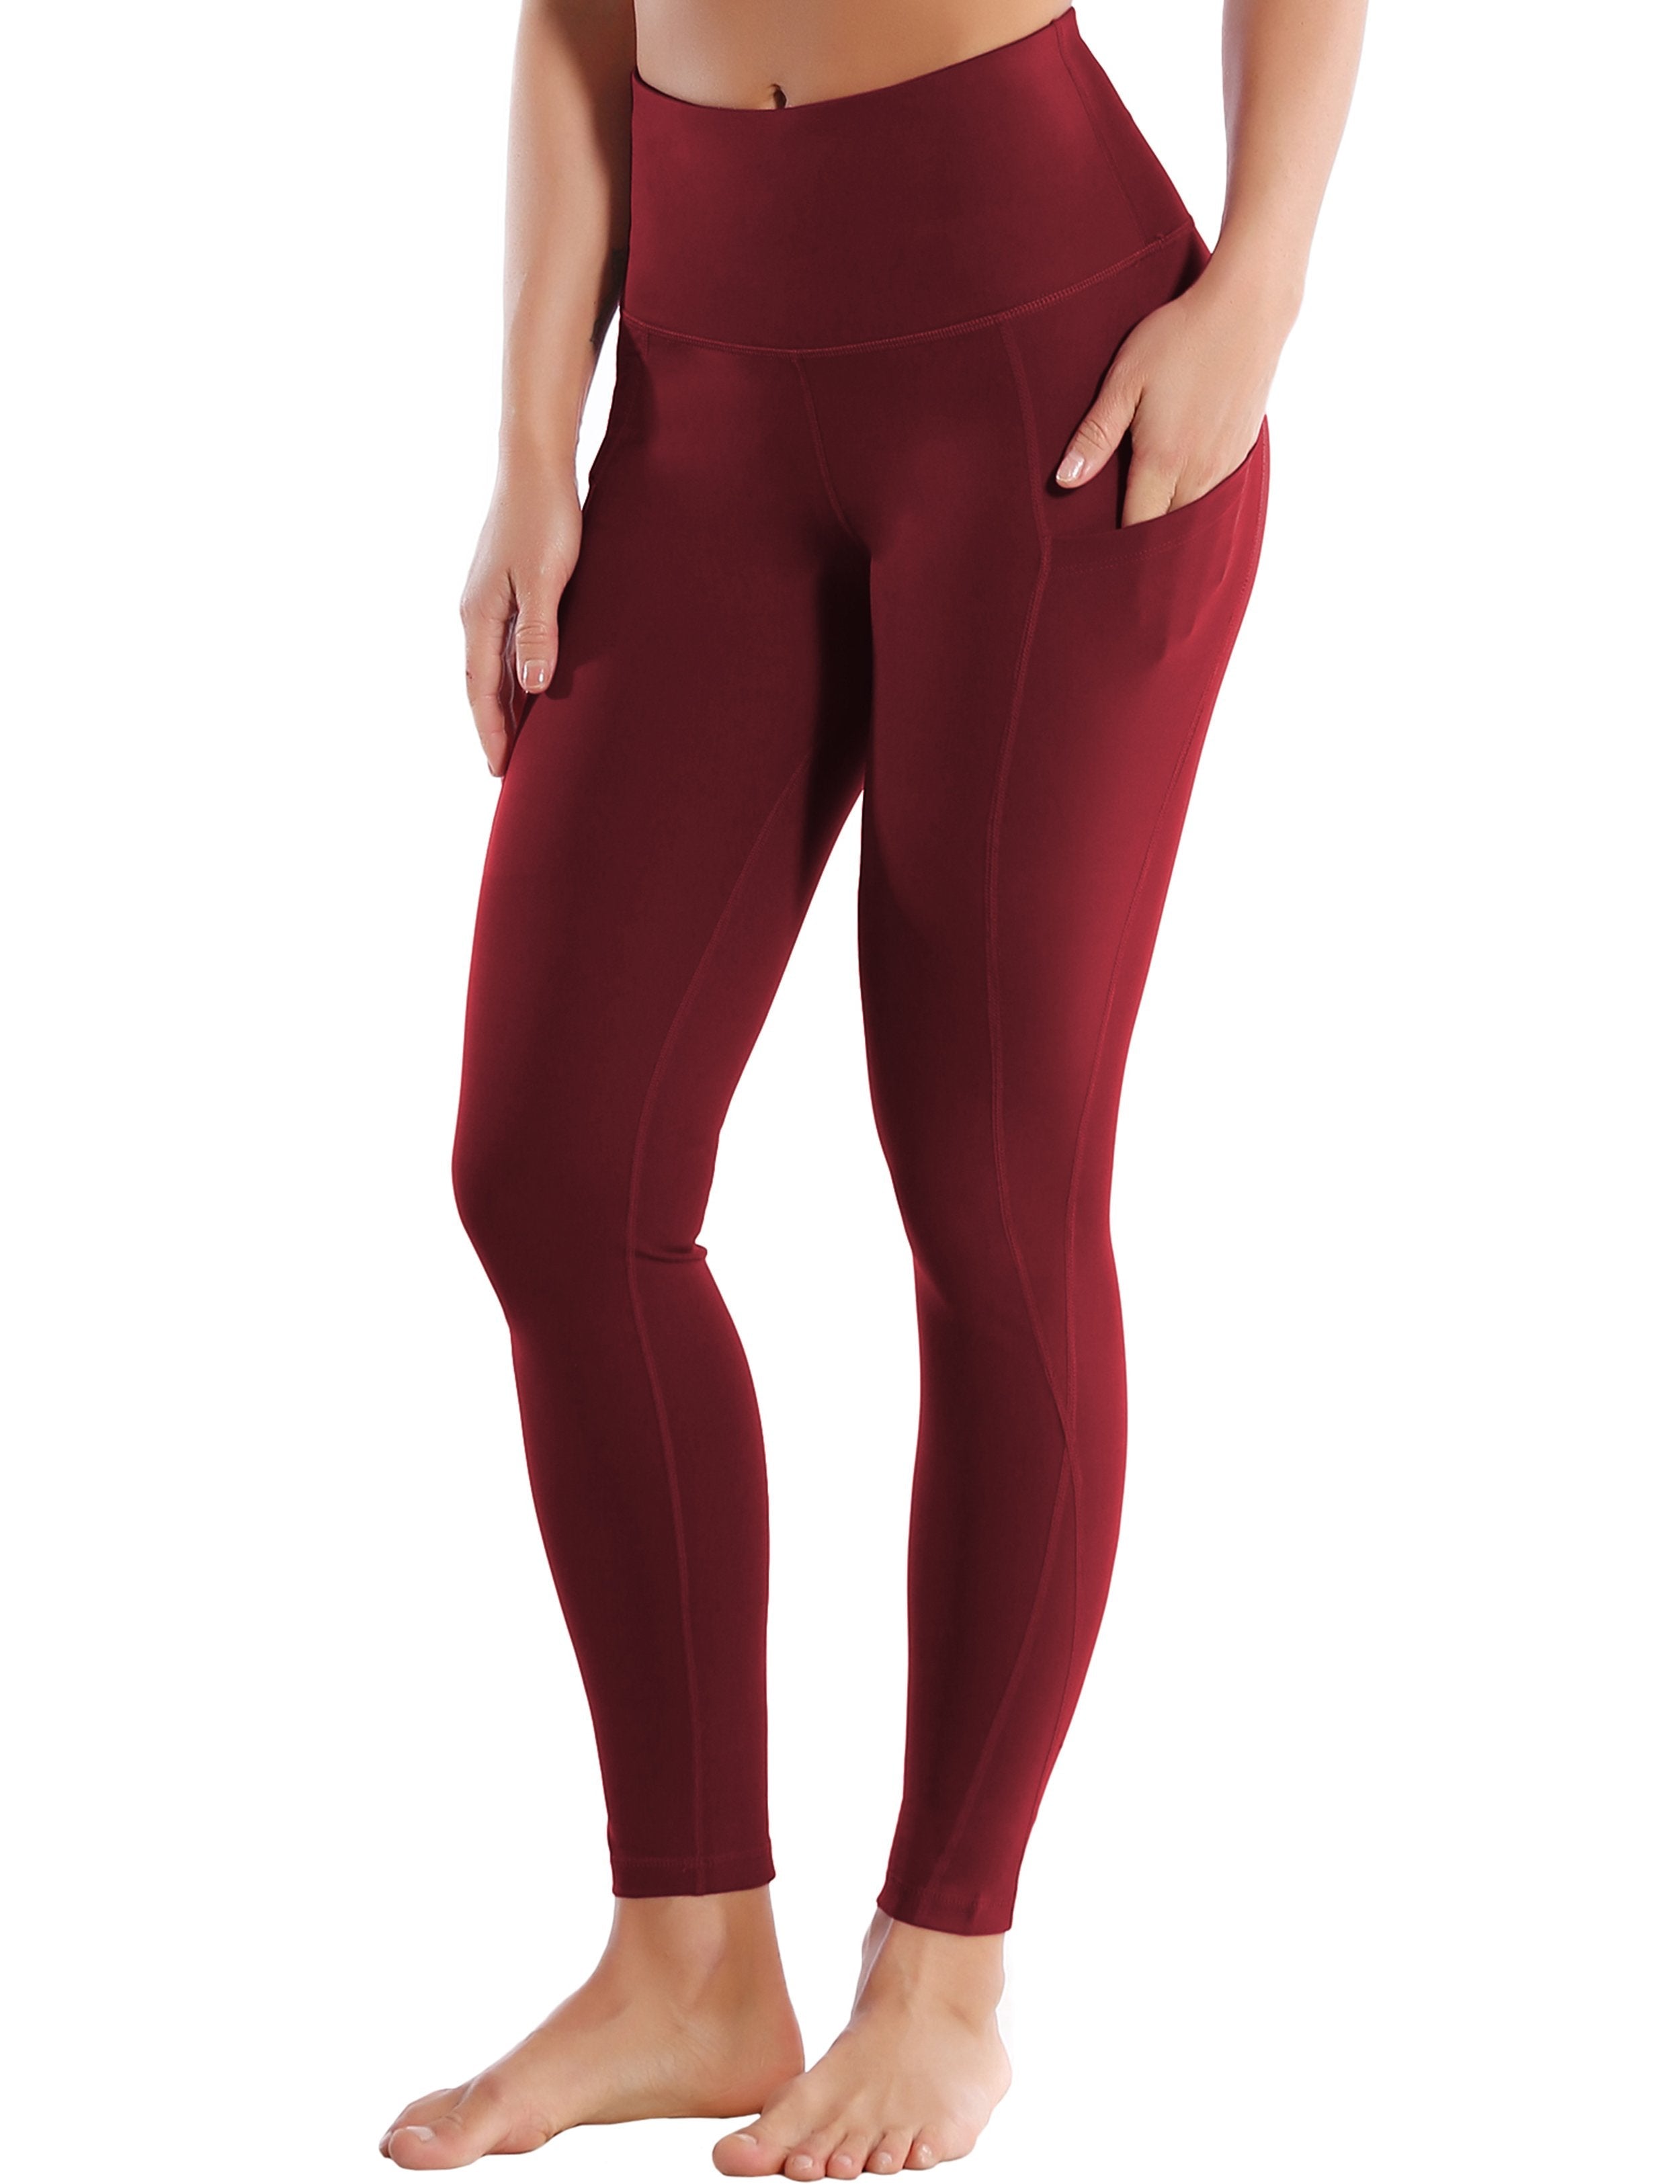 High Waist Side Pockets Tall Size Pants cherryred 75% Nylon, 25% Spandex Fabric doesn't attract lint easily 4-way stretch No see-through Moisture-wicking Tummy control Inner pocket